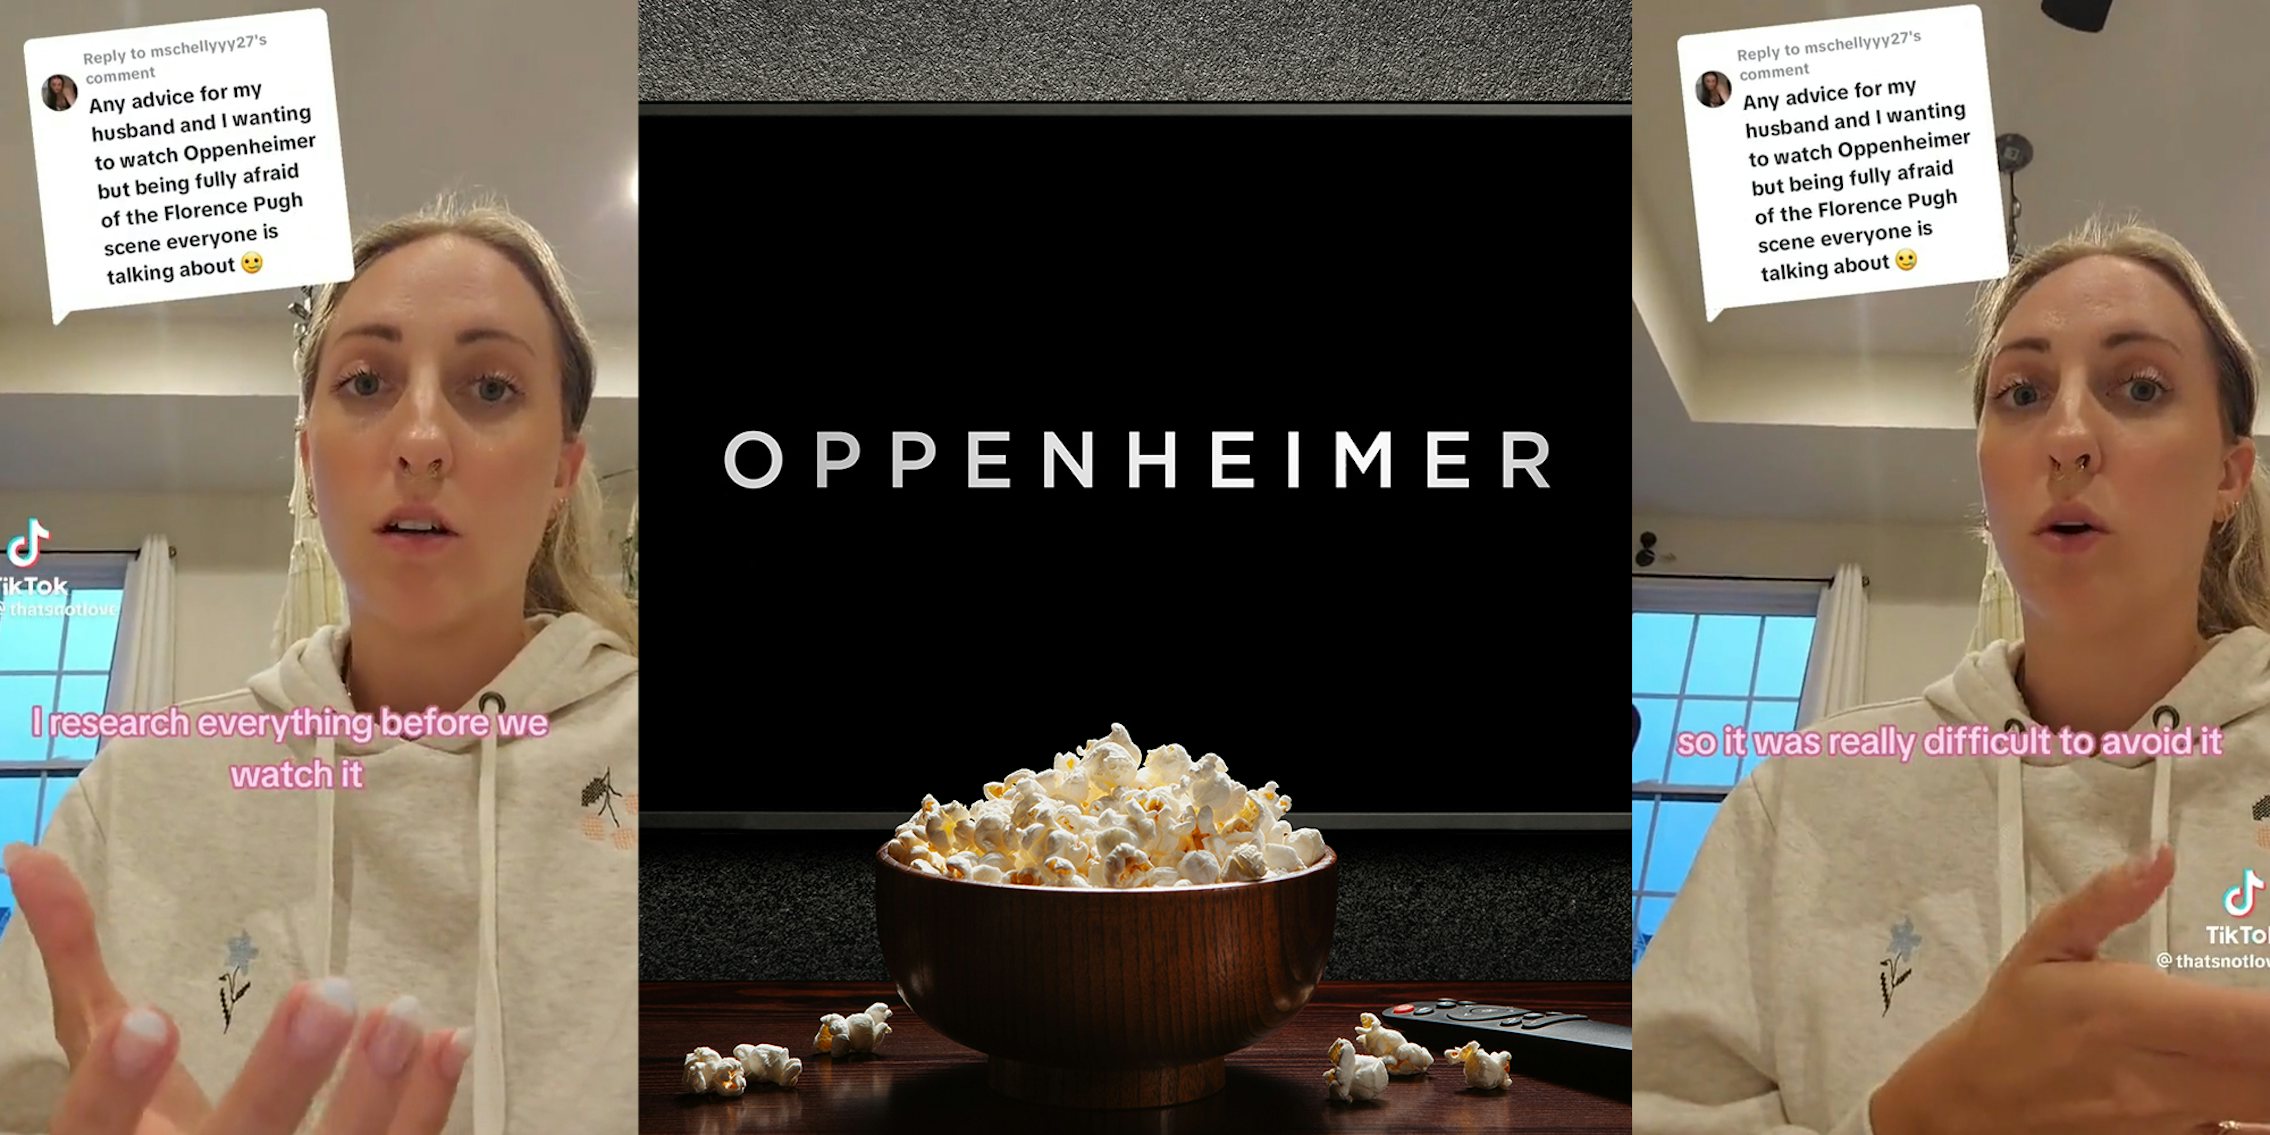 Woman wearing hoodie; Oppenheimer trailer or movie. TV with remote control and popcorn bowl.